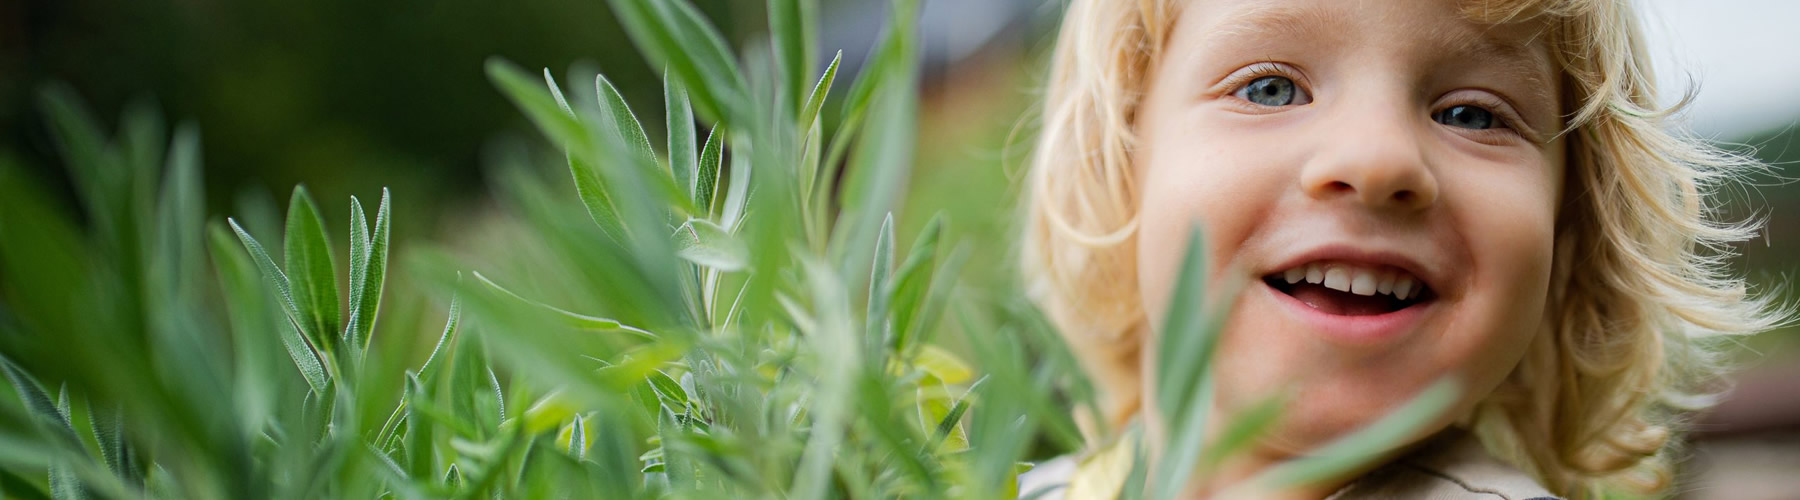 Enhancing Children’s Health with Herbs